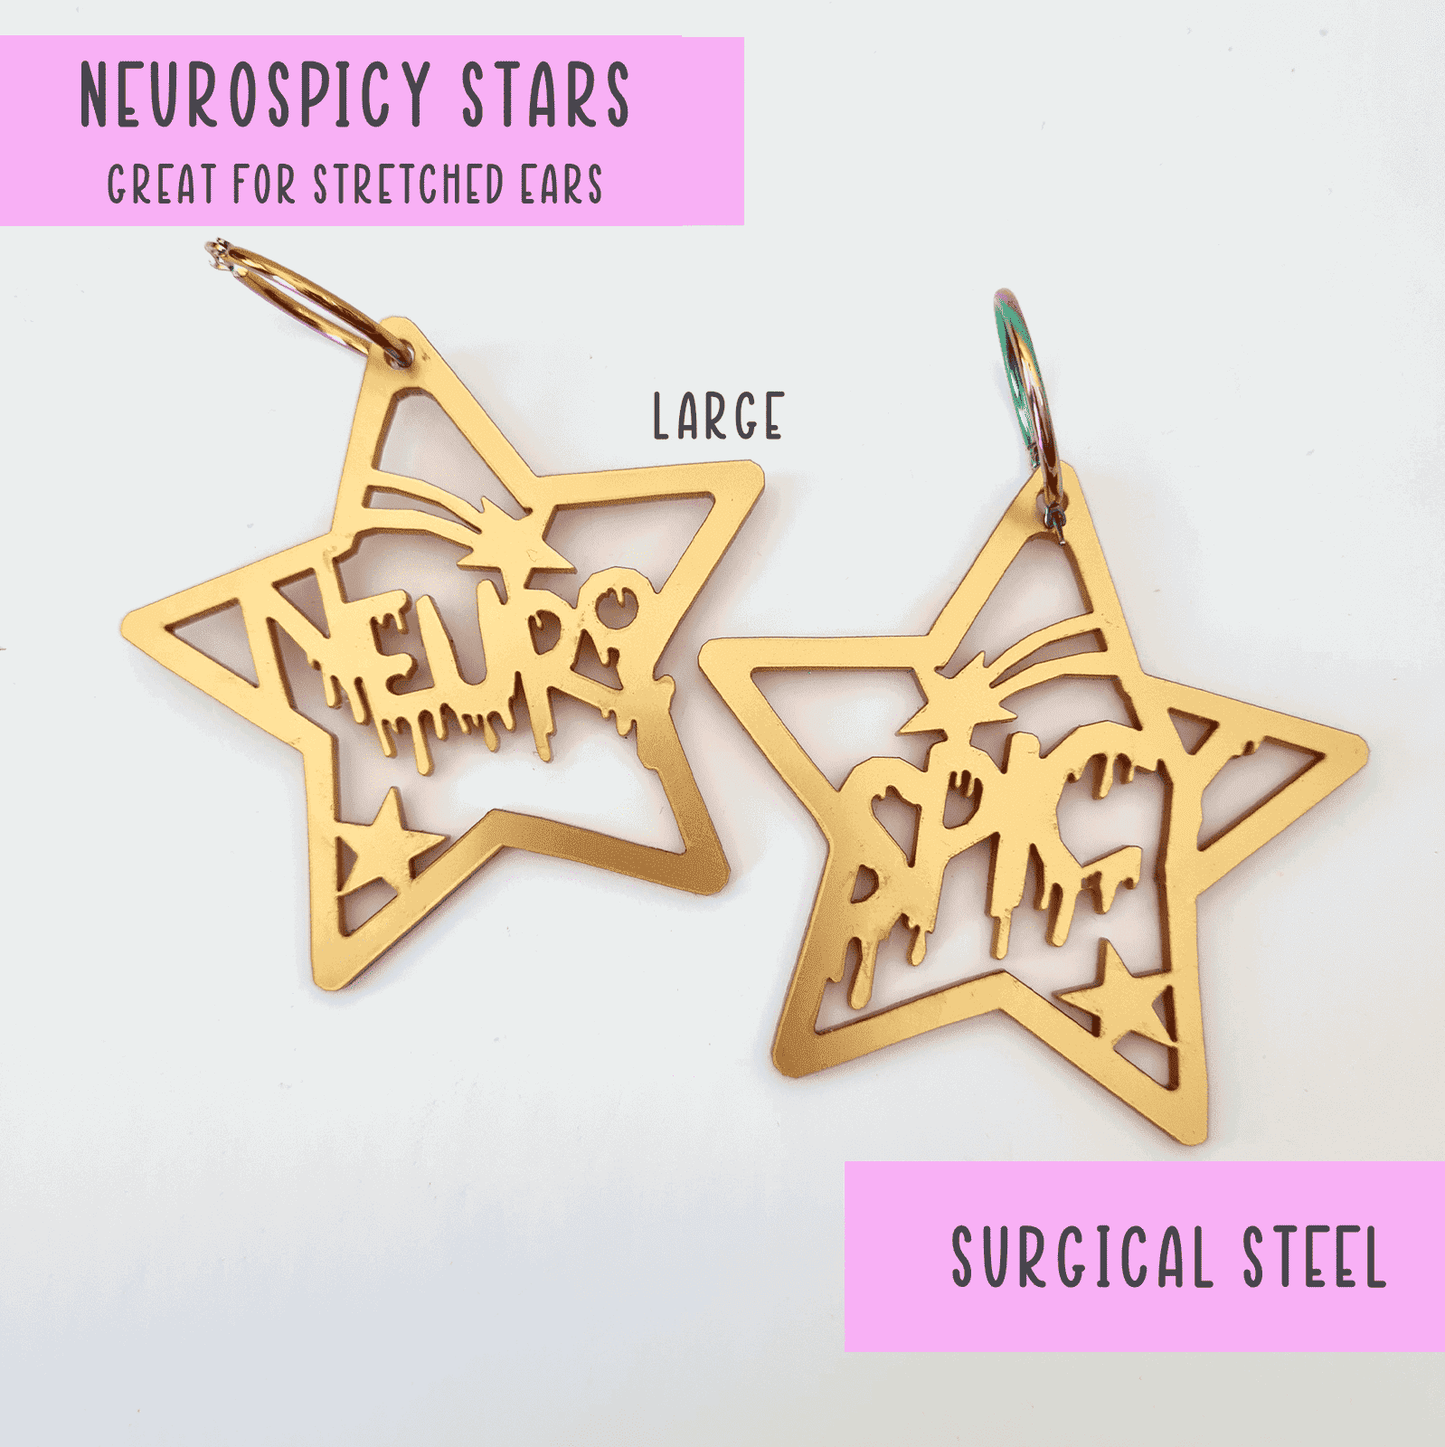 Neurospicy earrings great for stretched ears - MIXED SIZES